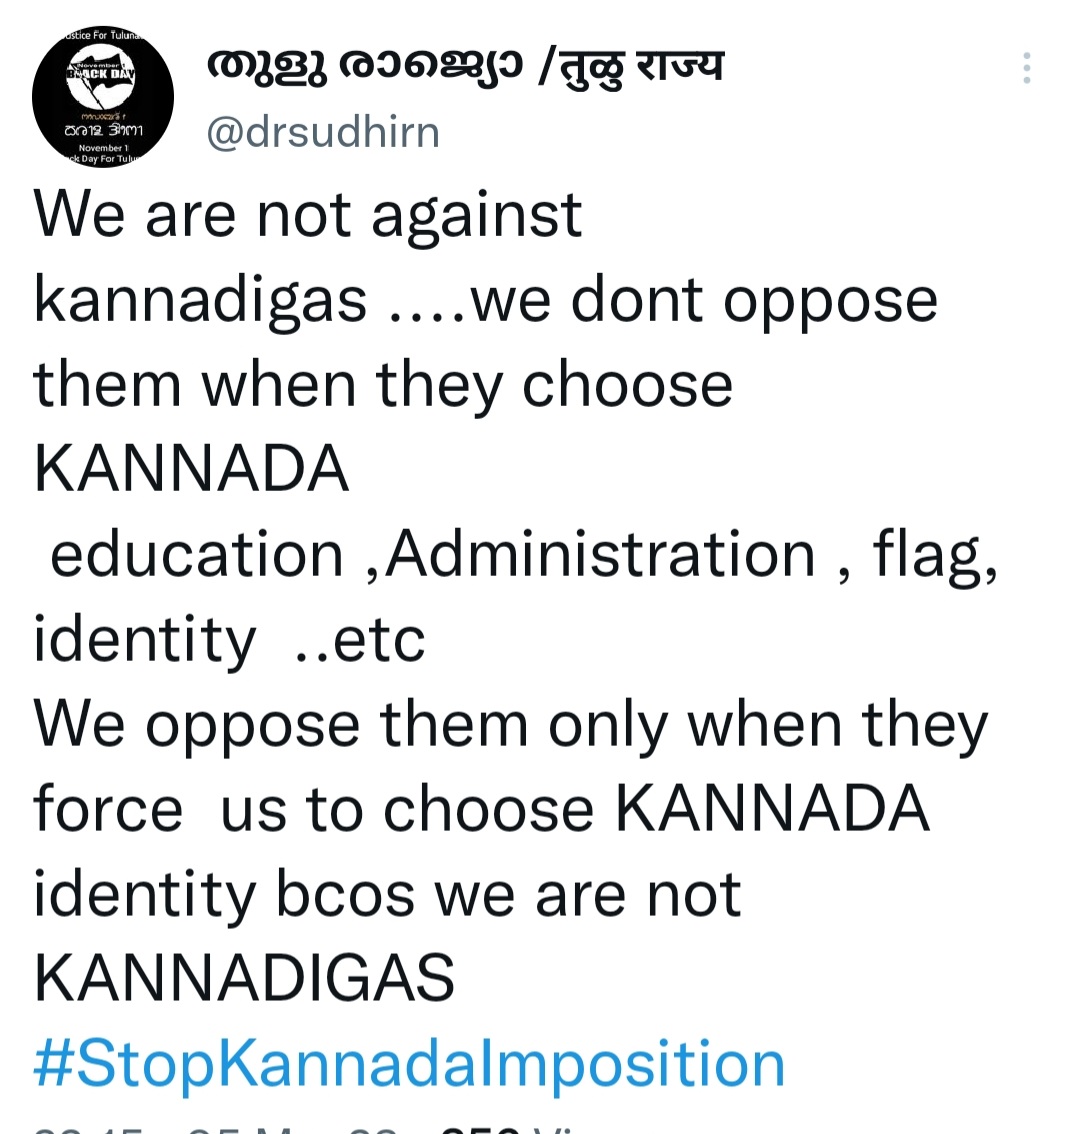 Ek taraf #stopHindiImposition chal raha aur kuch Tulu log  #StopKannadaImposition chala rahe 

The best solution is stop using any language. Lets all use hand gestures to communicate  😅